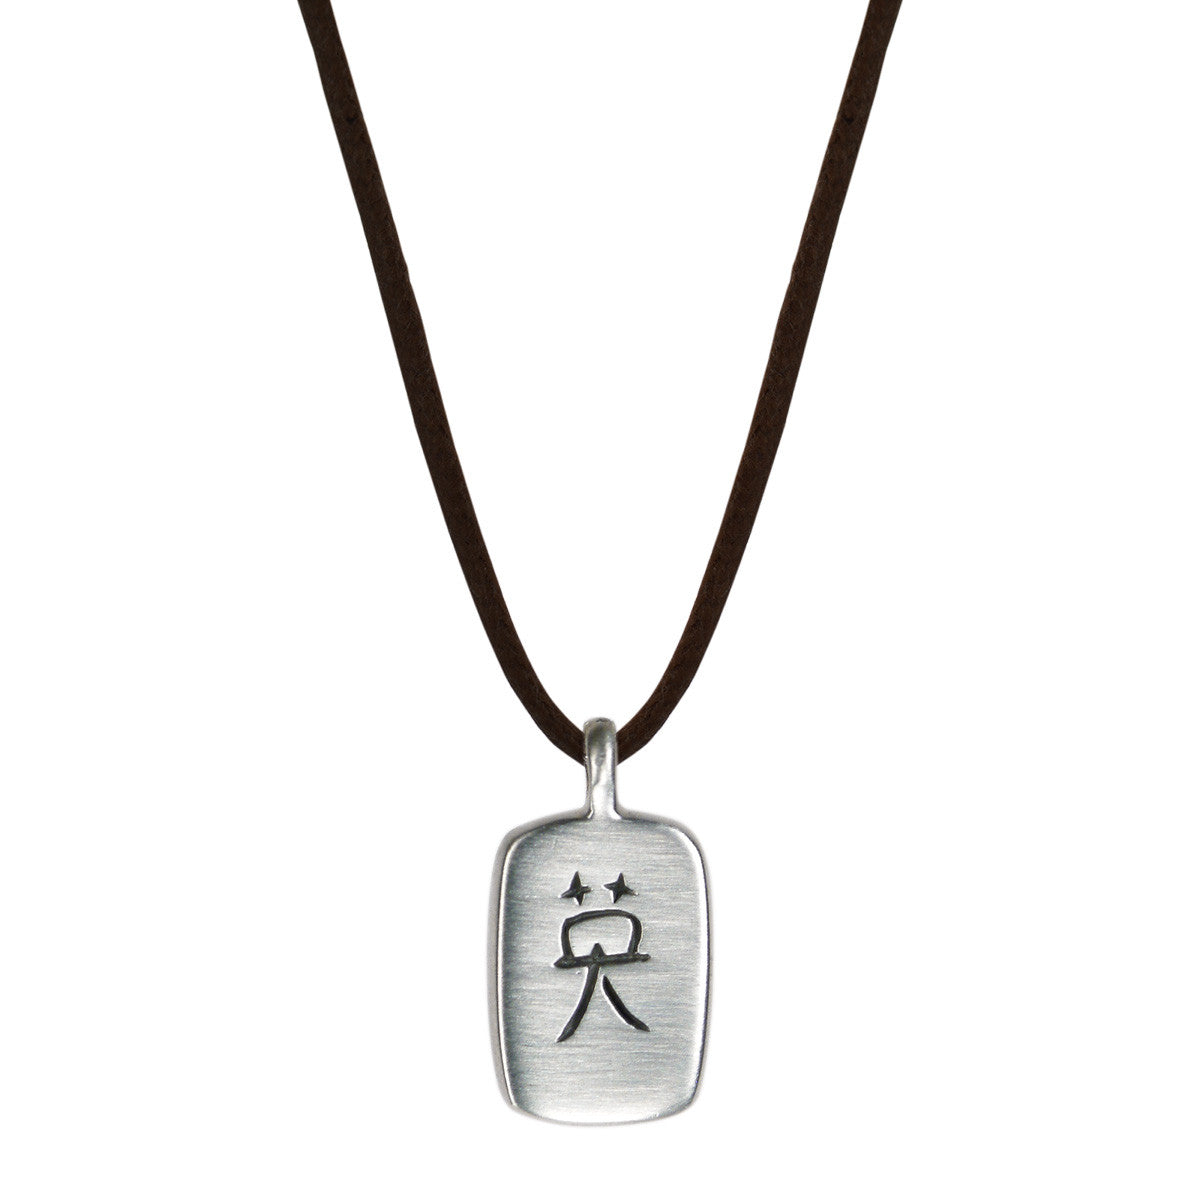 Men&#39;s Sterling Silver Courage Pendant on Black Cord